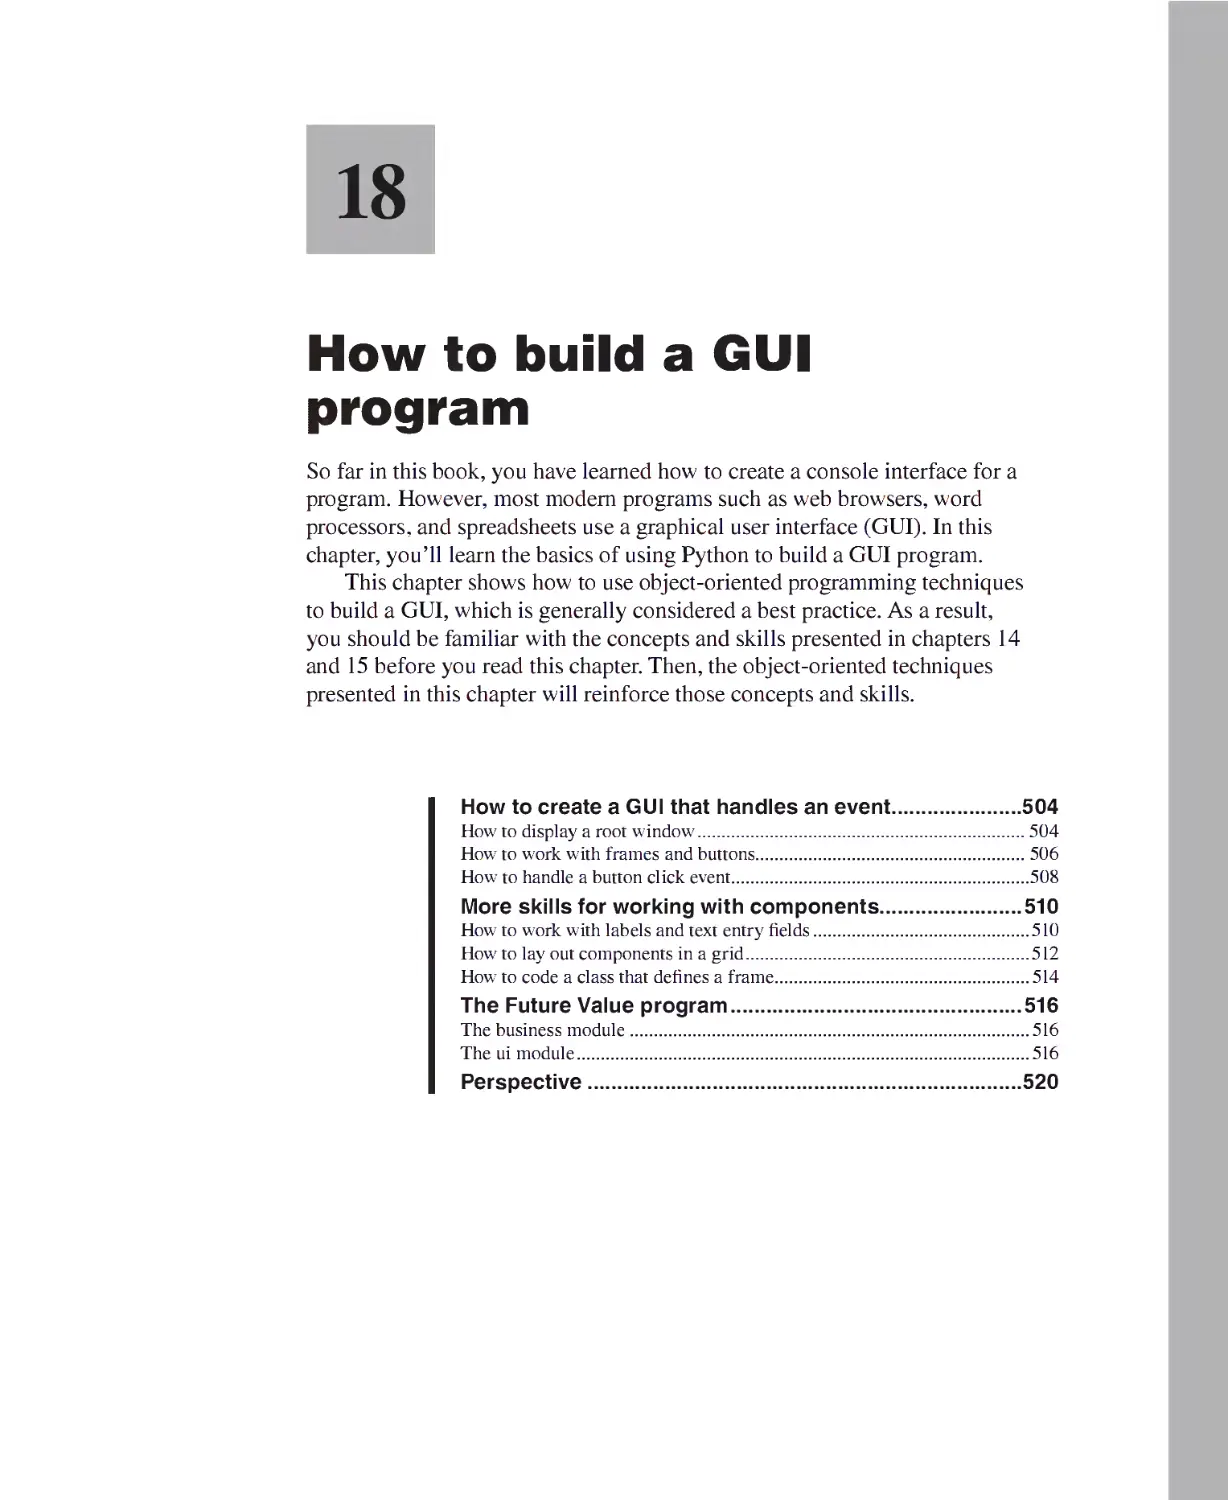 Chapter 18 - How to Build a GUI Program